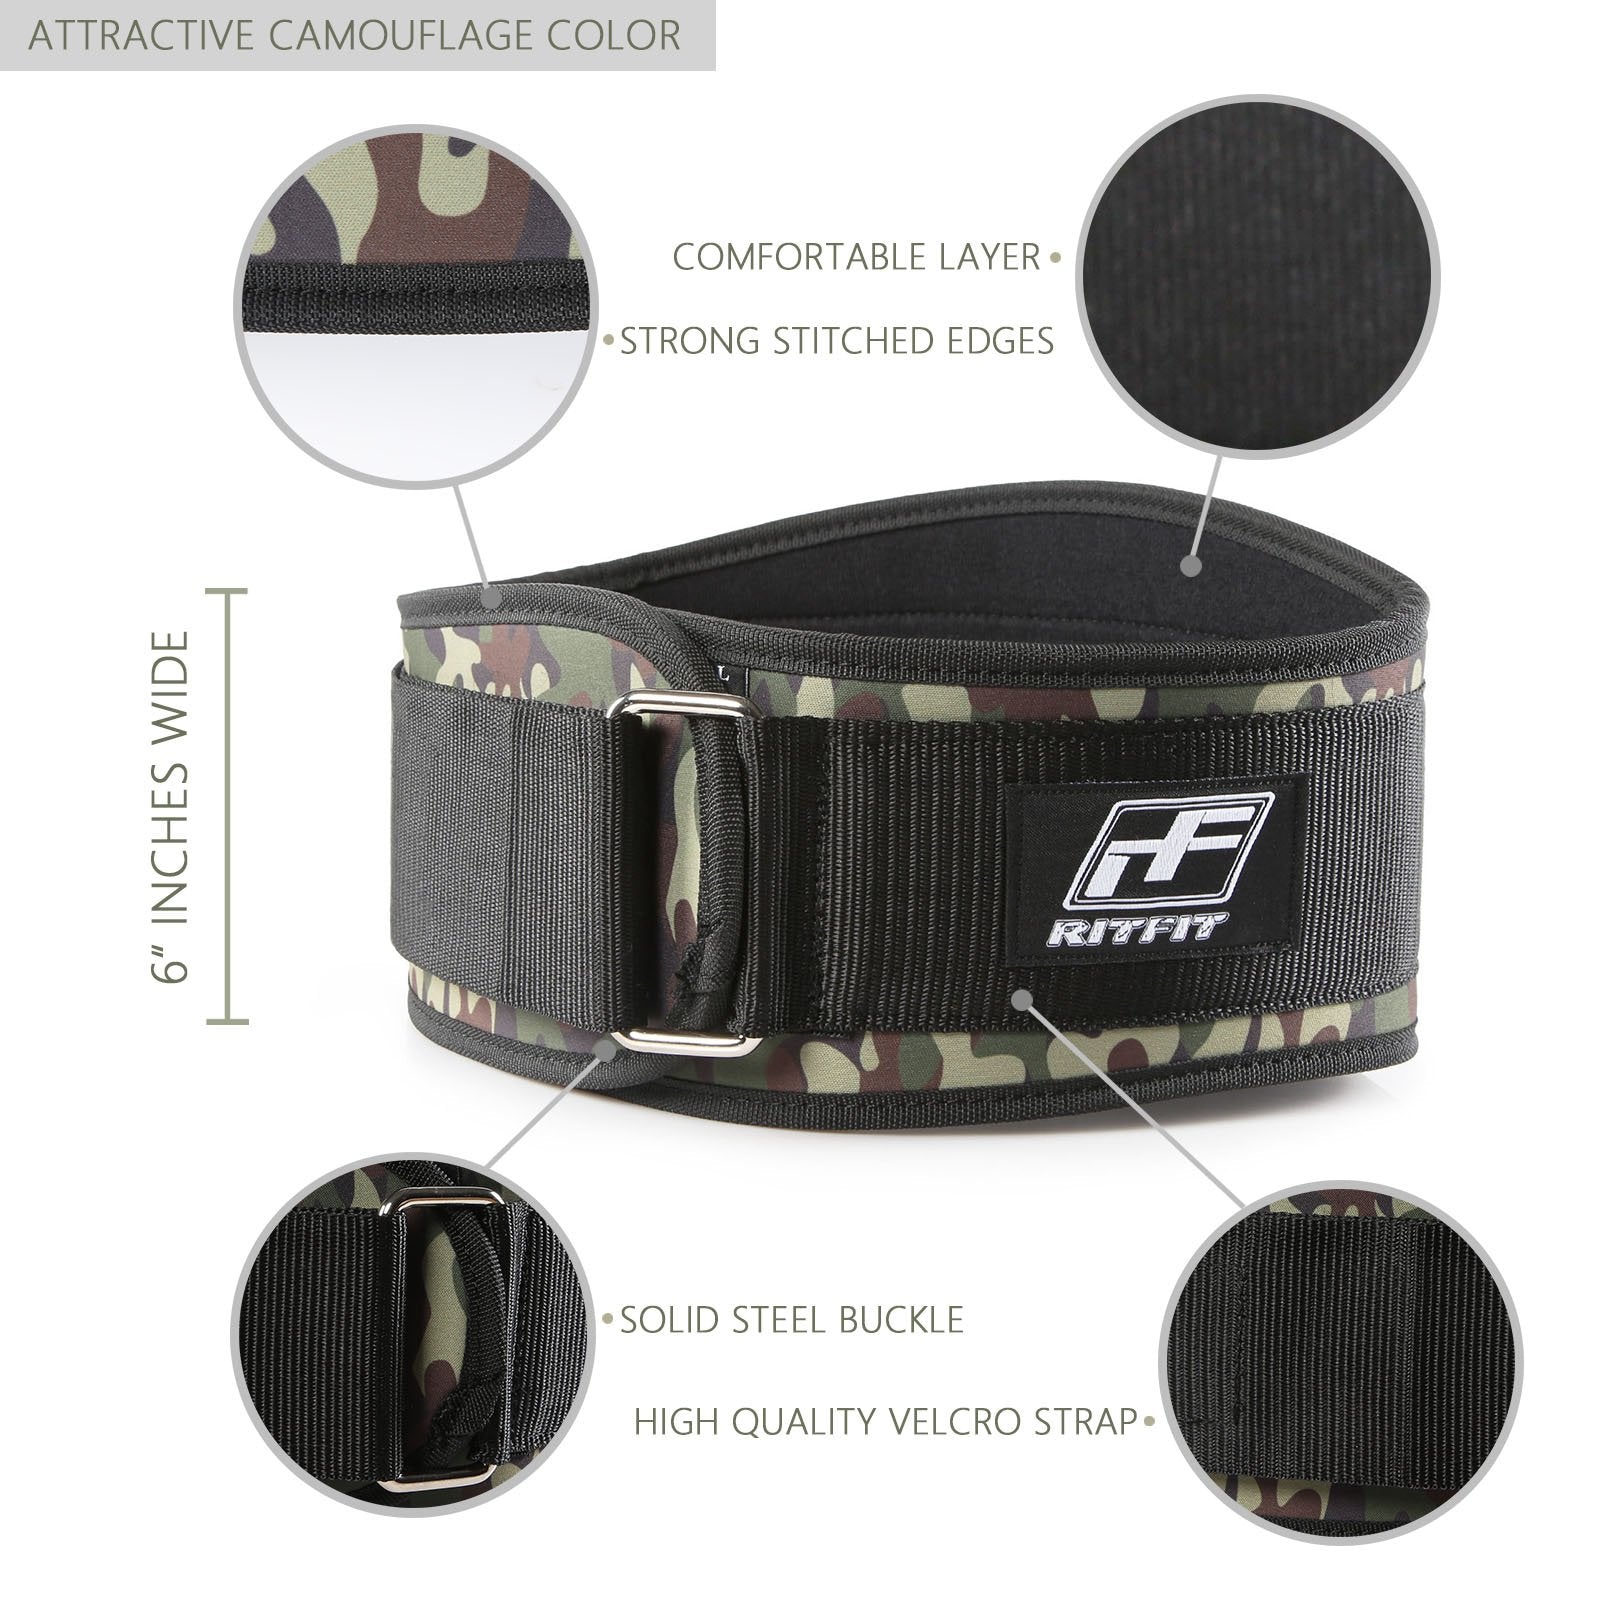 RitFit Weight Lifting Belt - Great for Squats, Crossfit, Lunges, Deadlift, Thrusters - Men and Women - 6 Inch Black (Camouflage, M(30-36''))